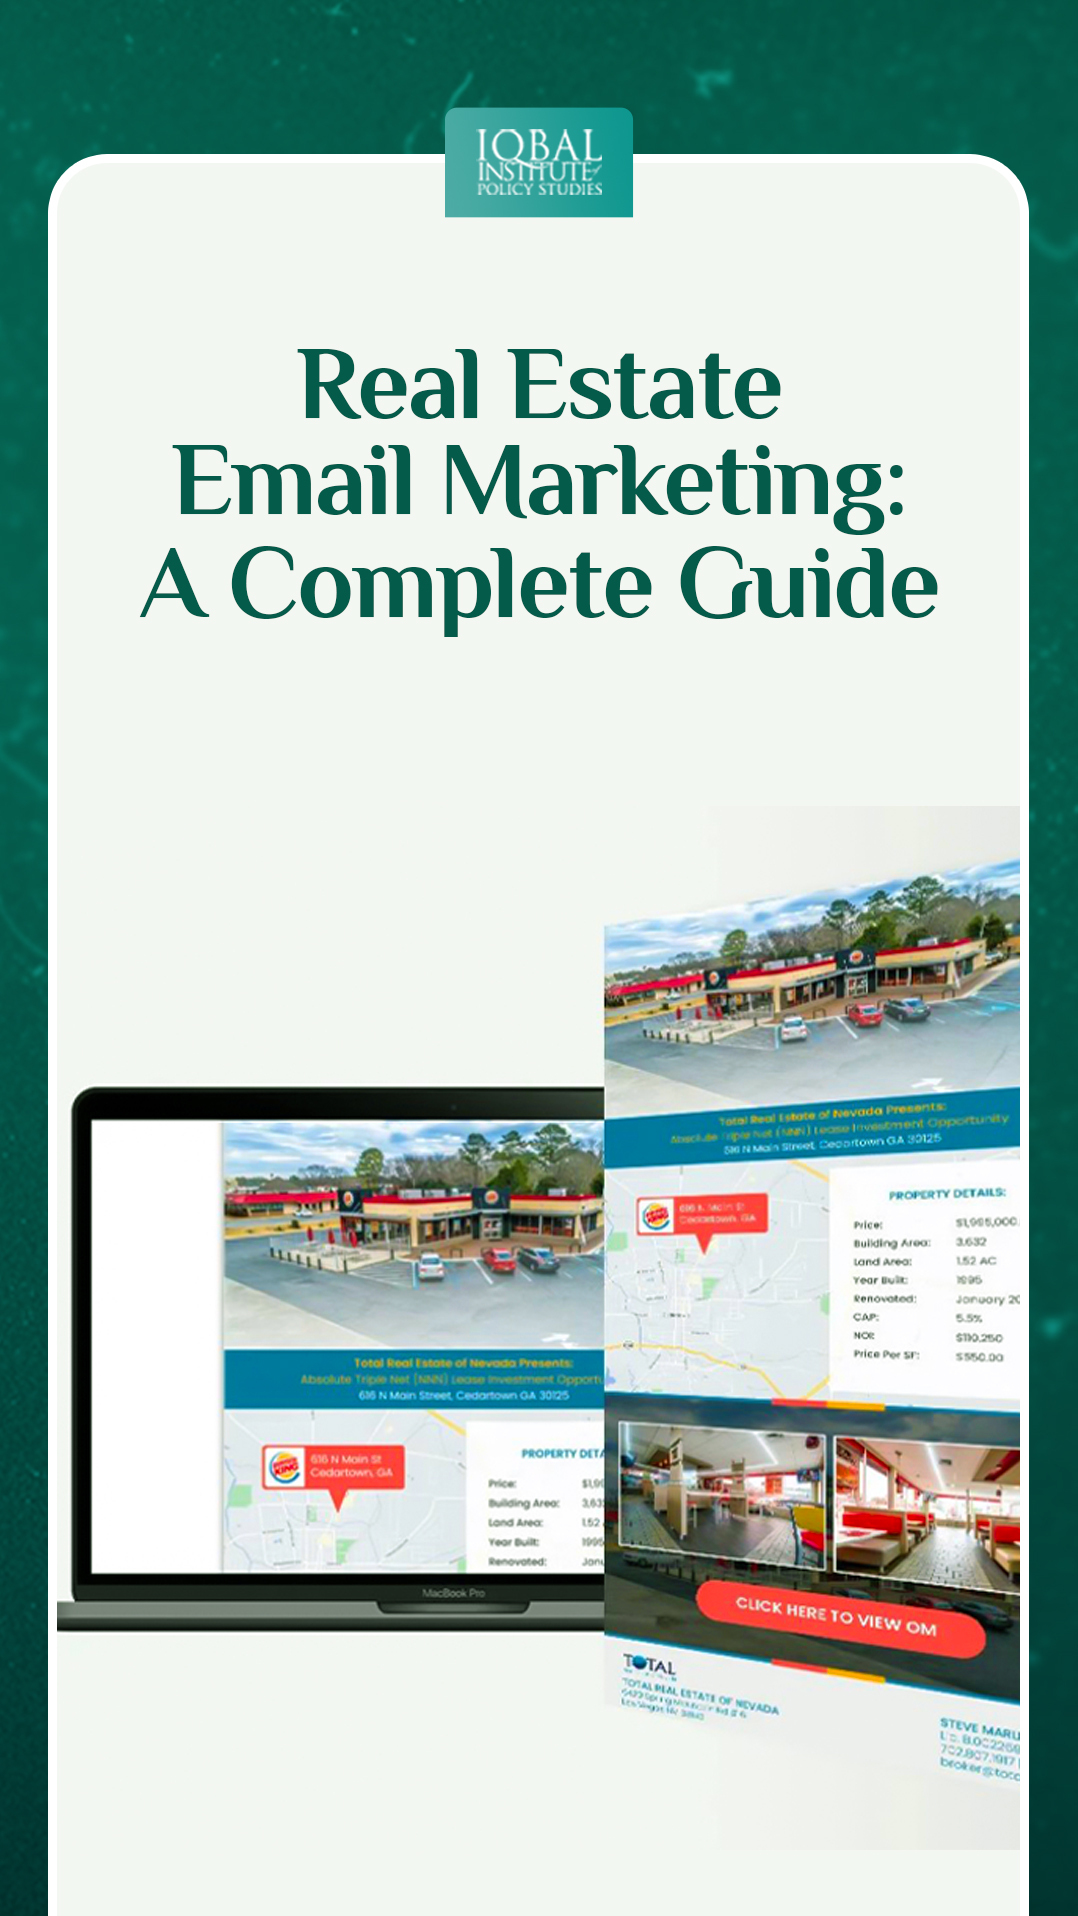 Real Estate Email Marketing: A Complete Guide